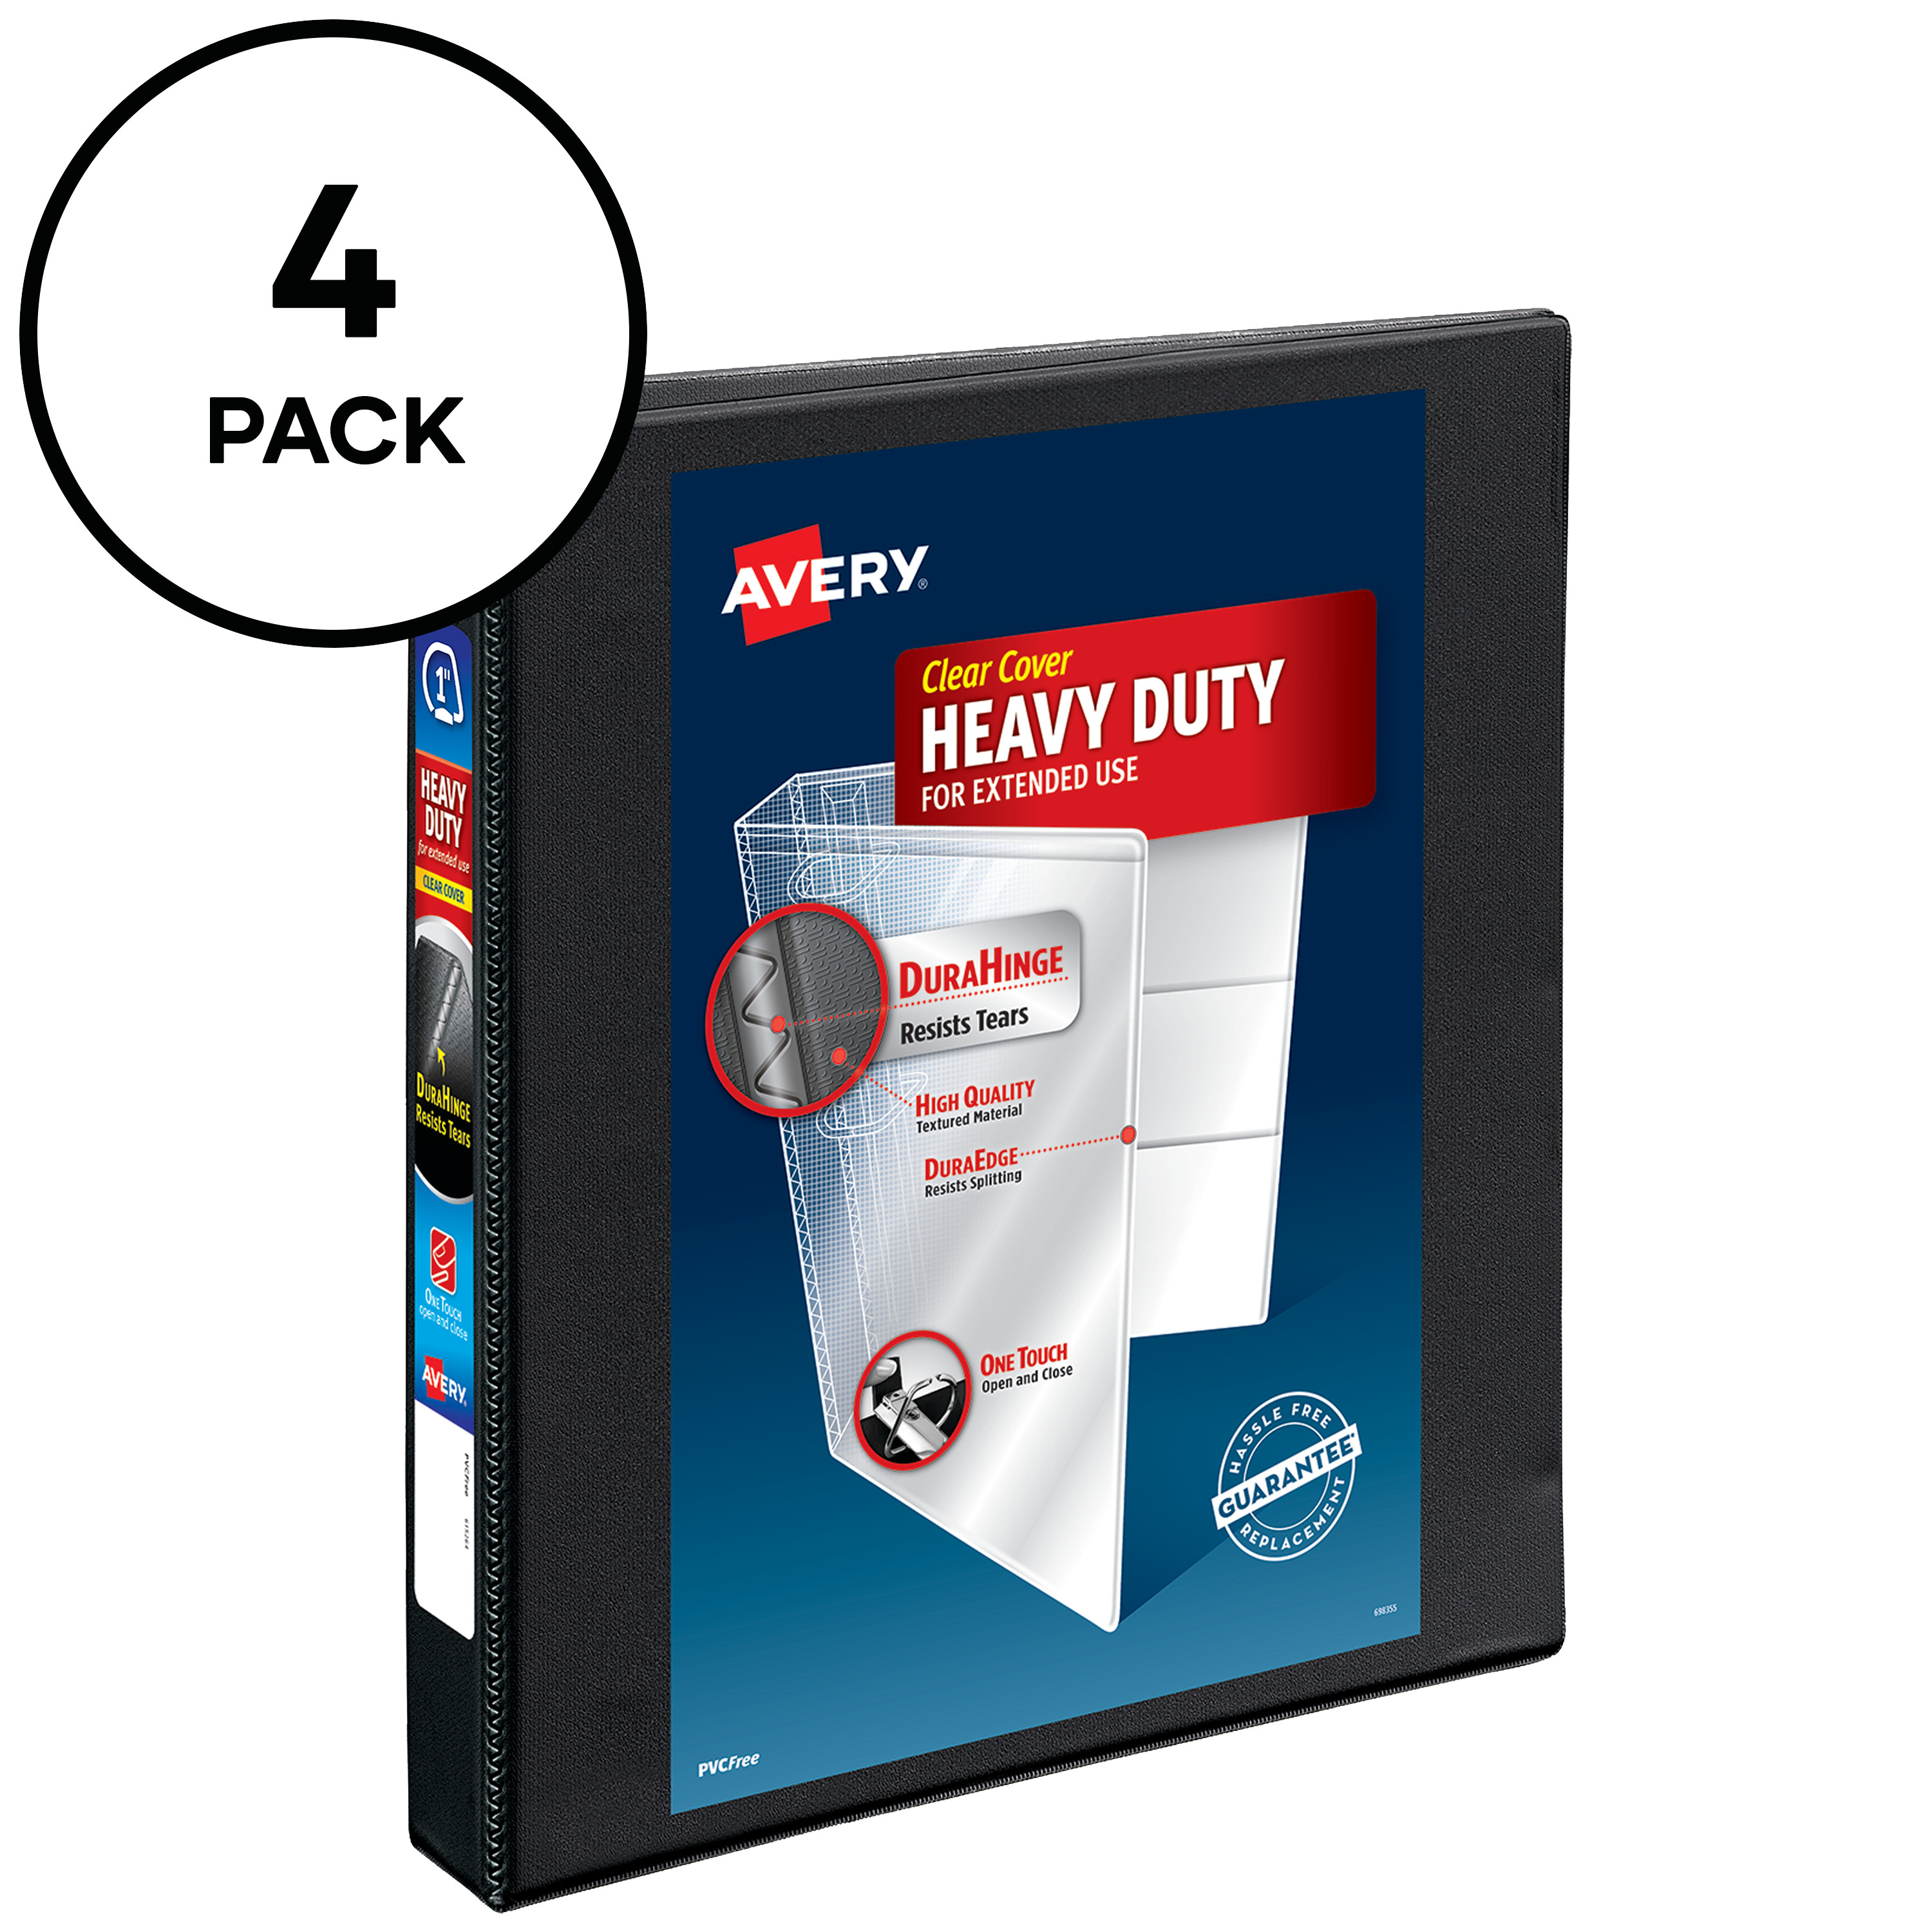 Avery Heavy Duty View 3 Ring Binders, 1" One Touch Slant Rings, Black Binders (17251) (Pack of 4) - image 3 of 9